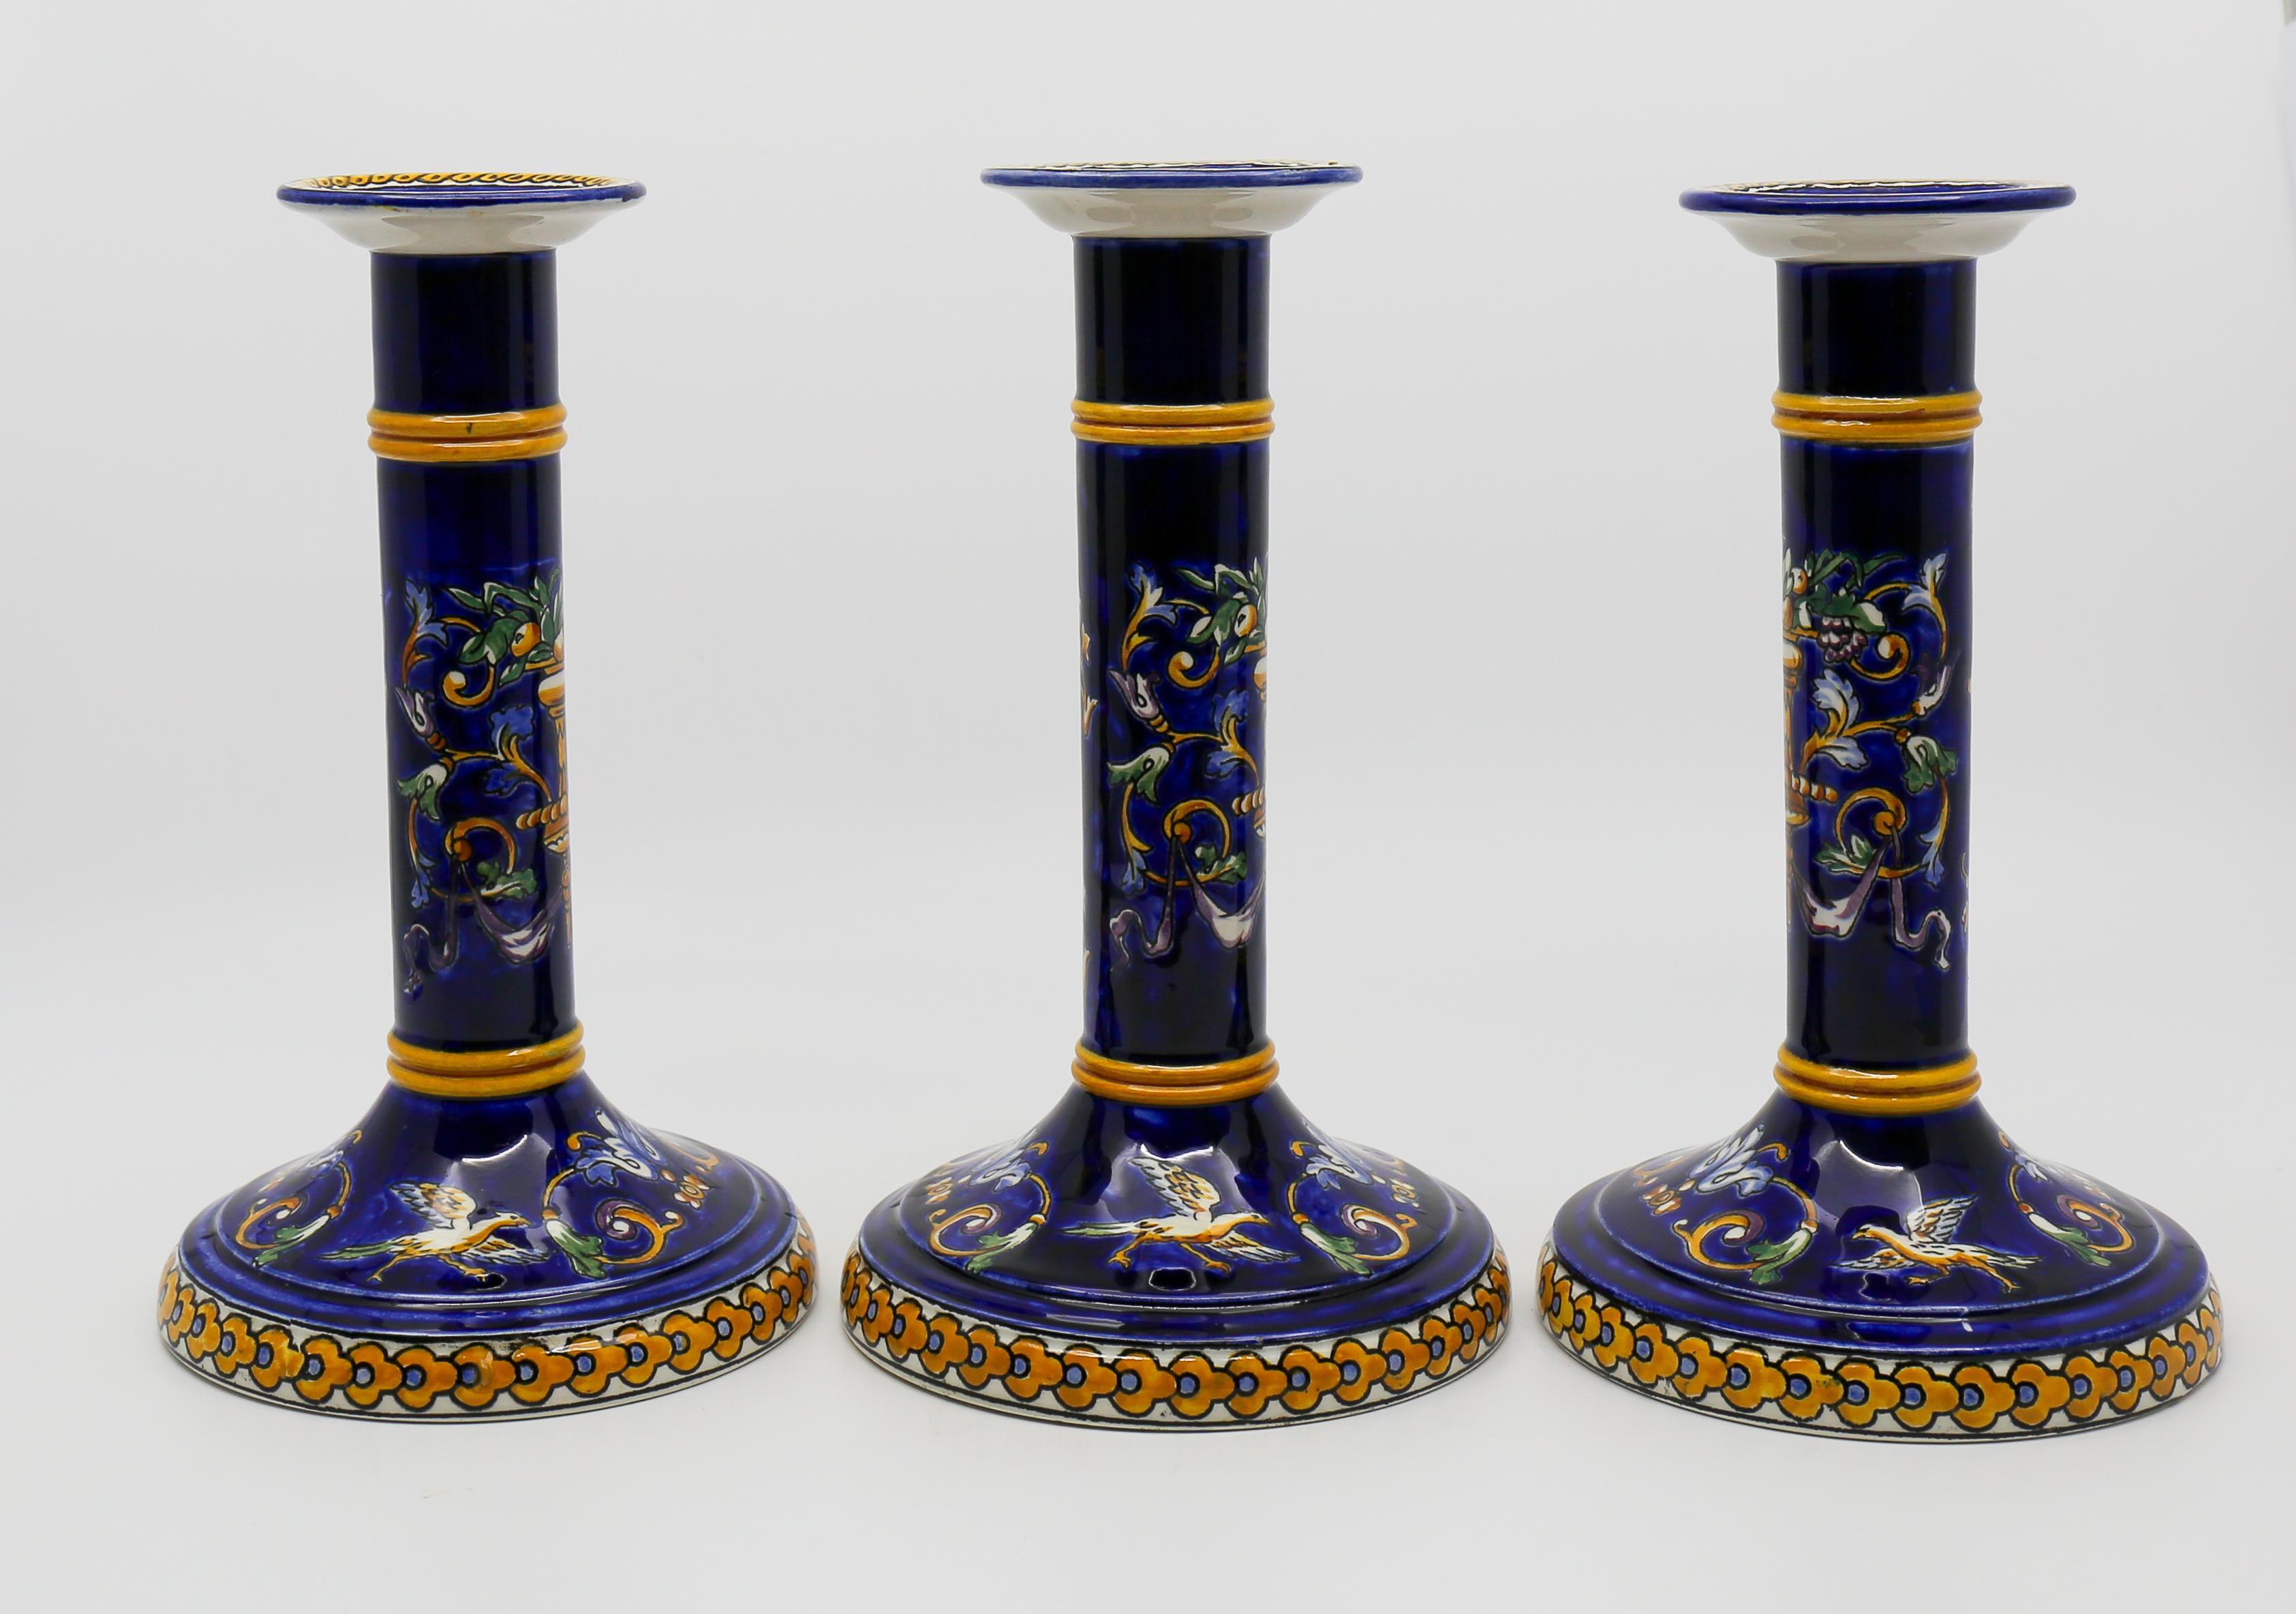 Three very beautiful Gien Renaissance model candlesticks in its night blue version. 
The base is cut out for a wire passage. Probably an adjustment to install a lamp. Apart from this small cut, no defect.